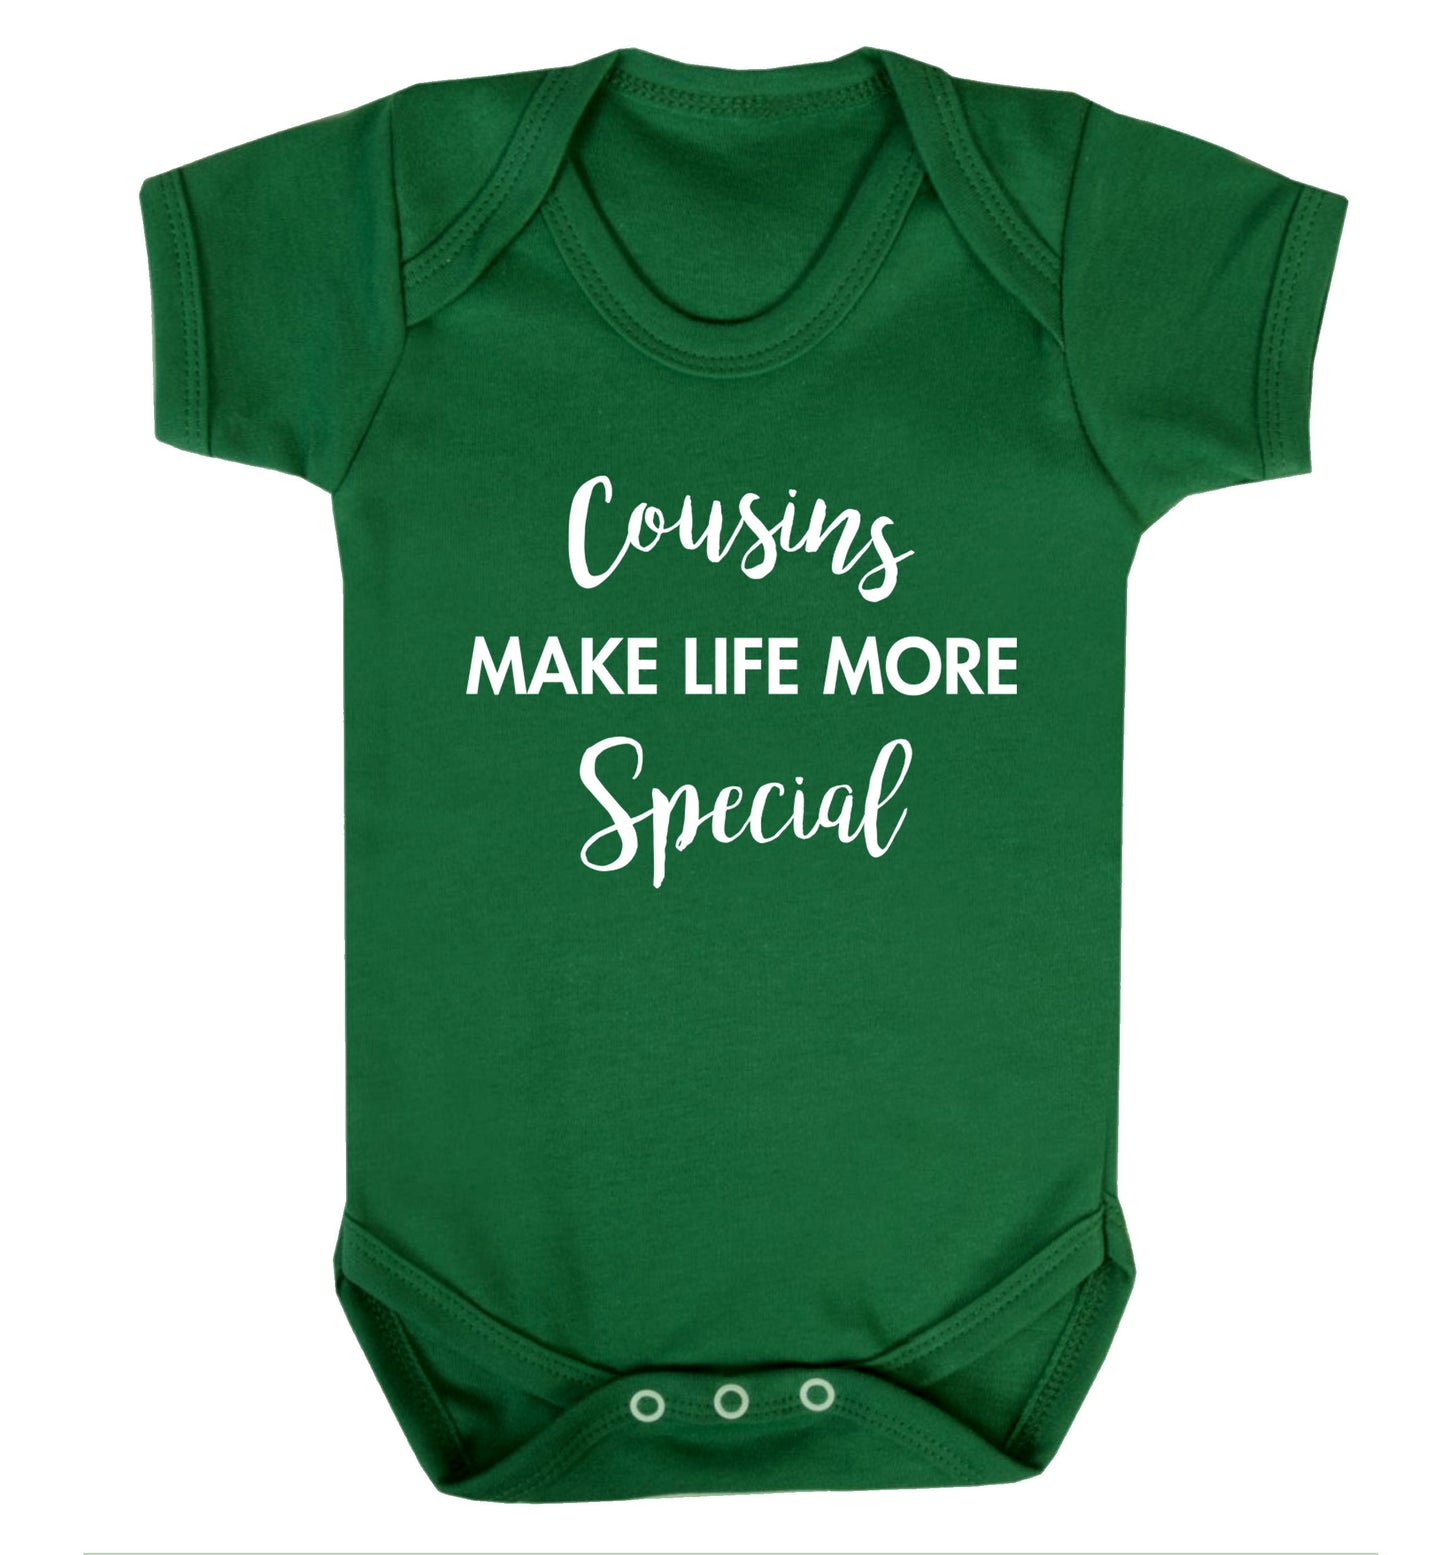 Cousins make life more special Baby Vest green 18-24 months